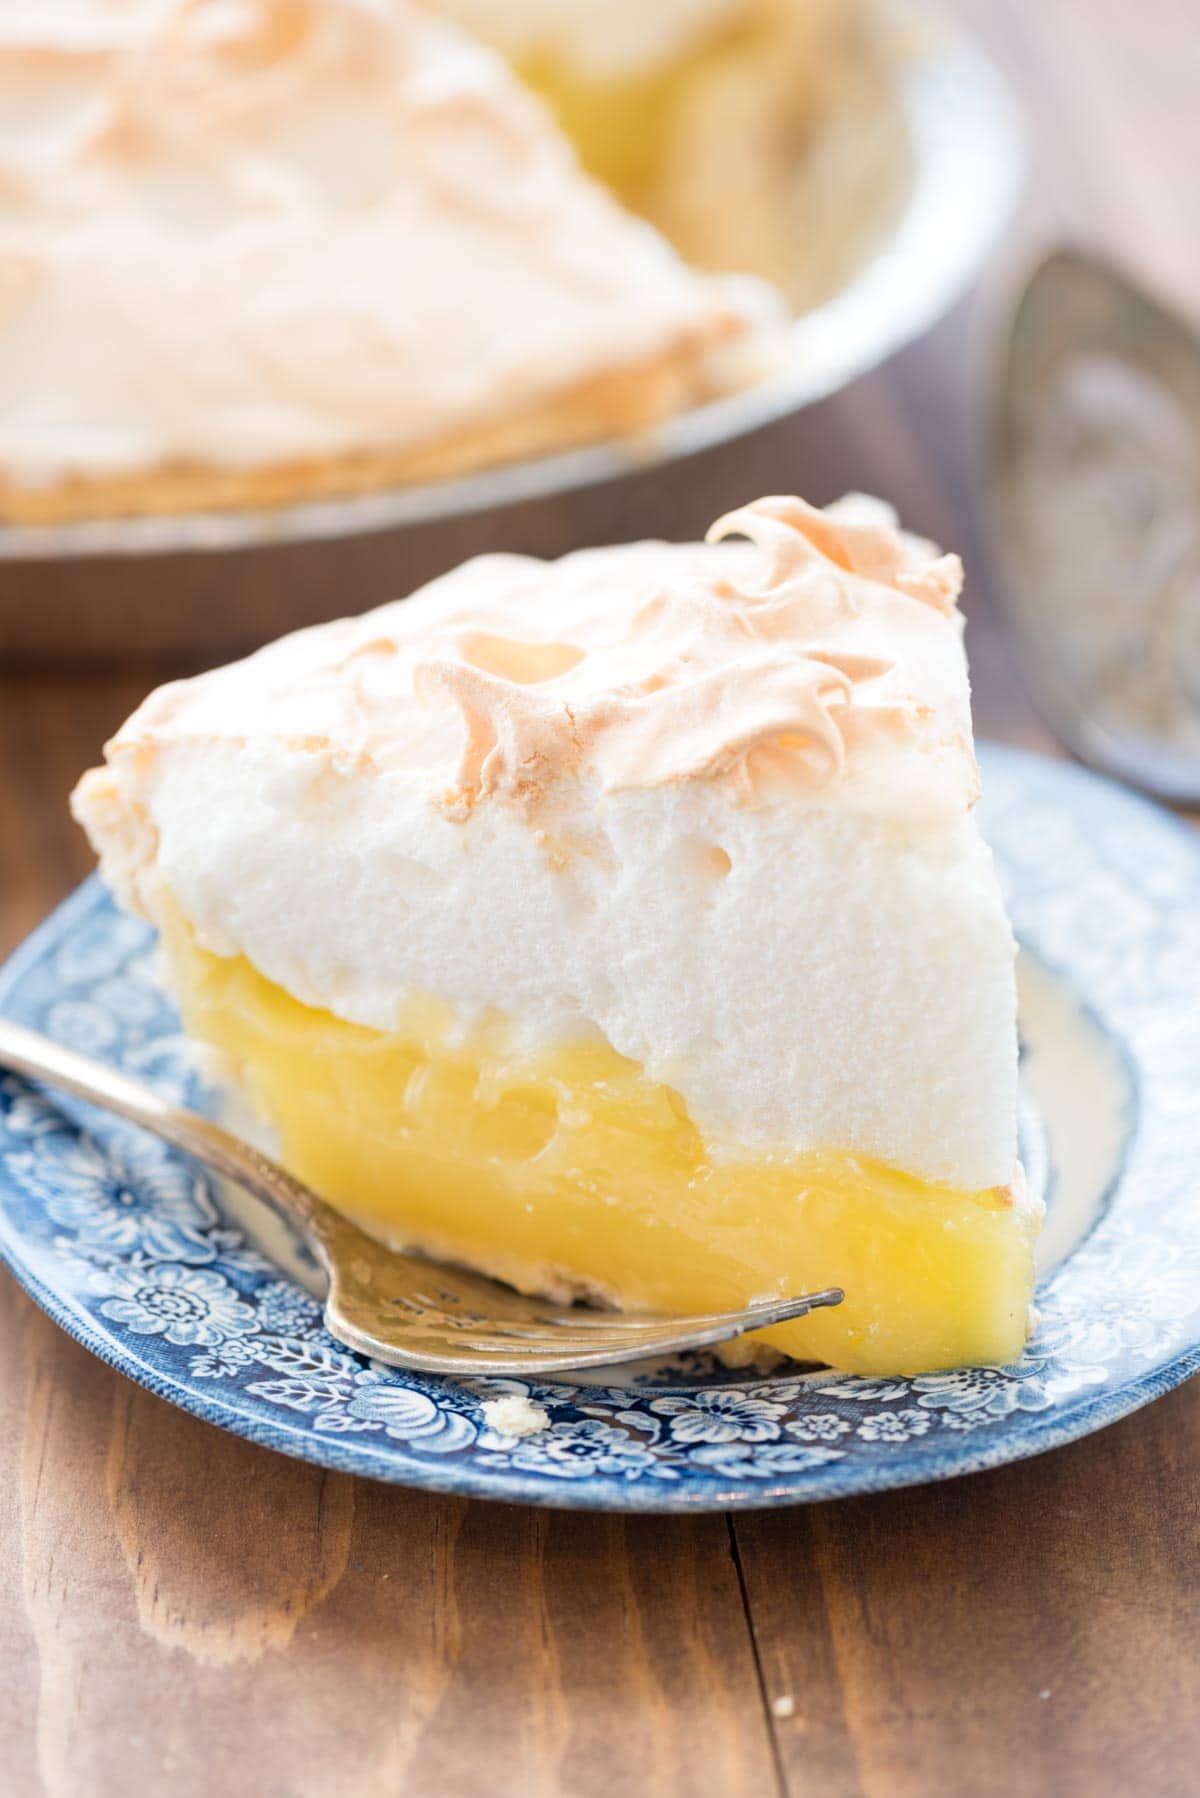 Aunt Tootsie's Lemon Meringue Pie - this recipe is from my great aunt and it is a family favorite! The lemon is sweet and tart and the pie is perfect lemon lovers!